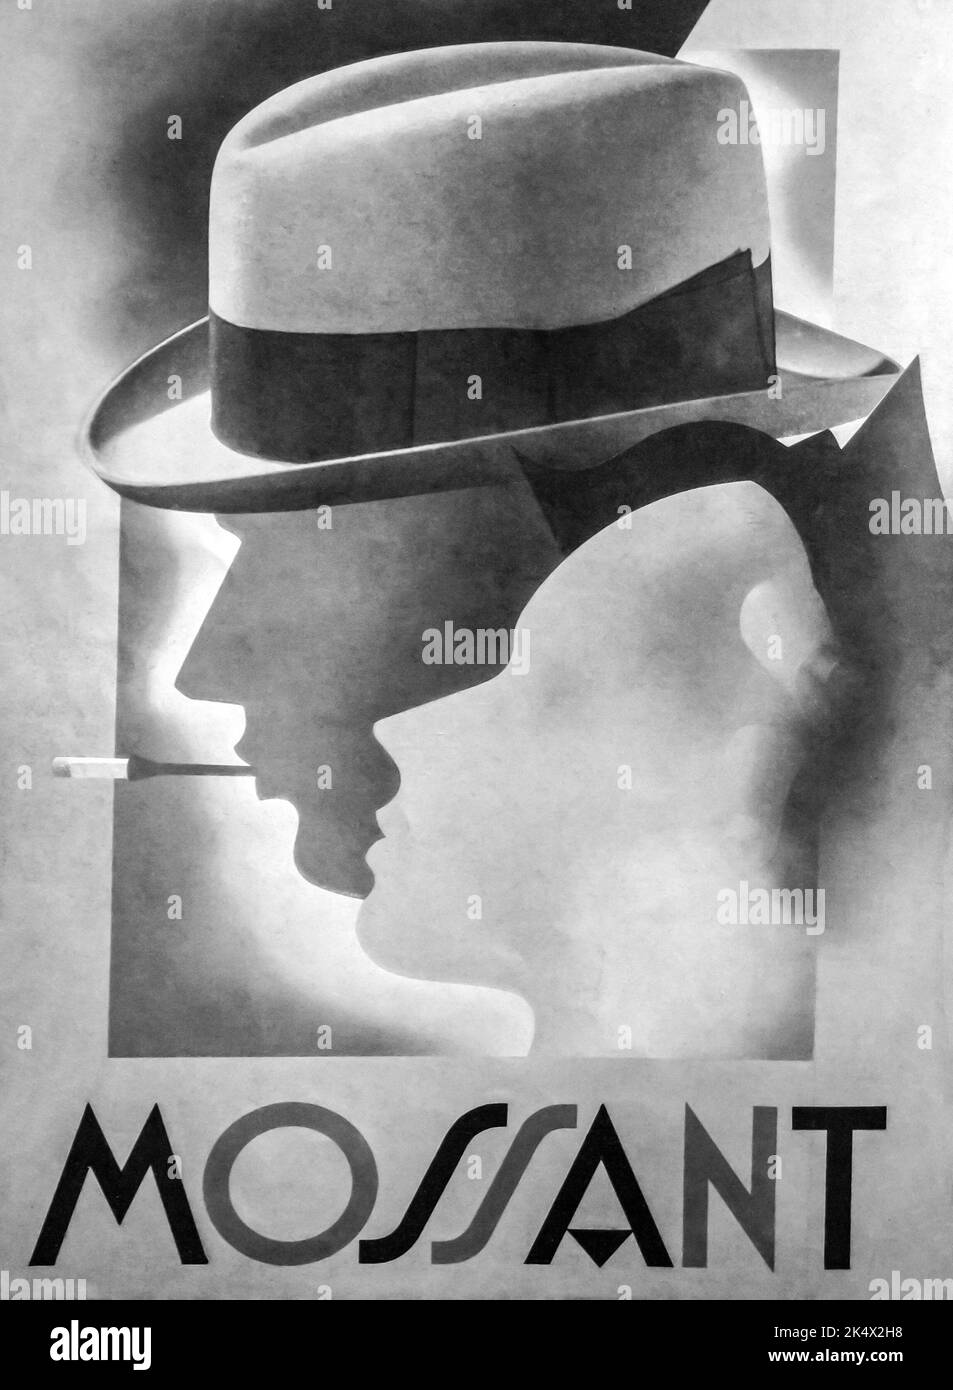 30's advertising : MOSSANT french hats Stock Photo